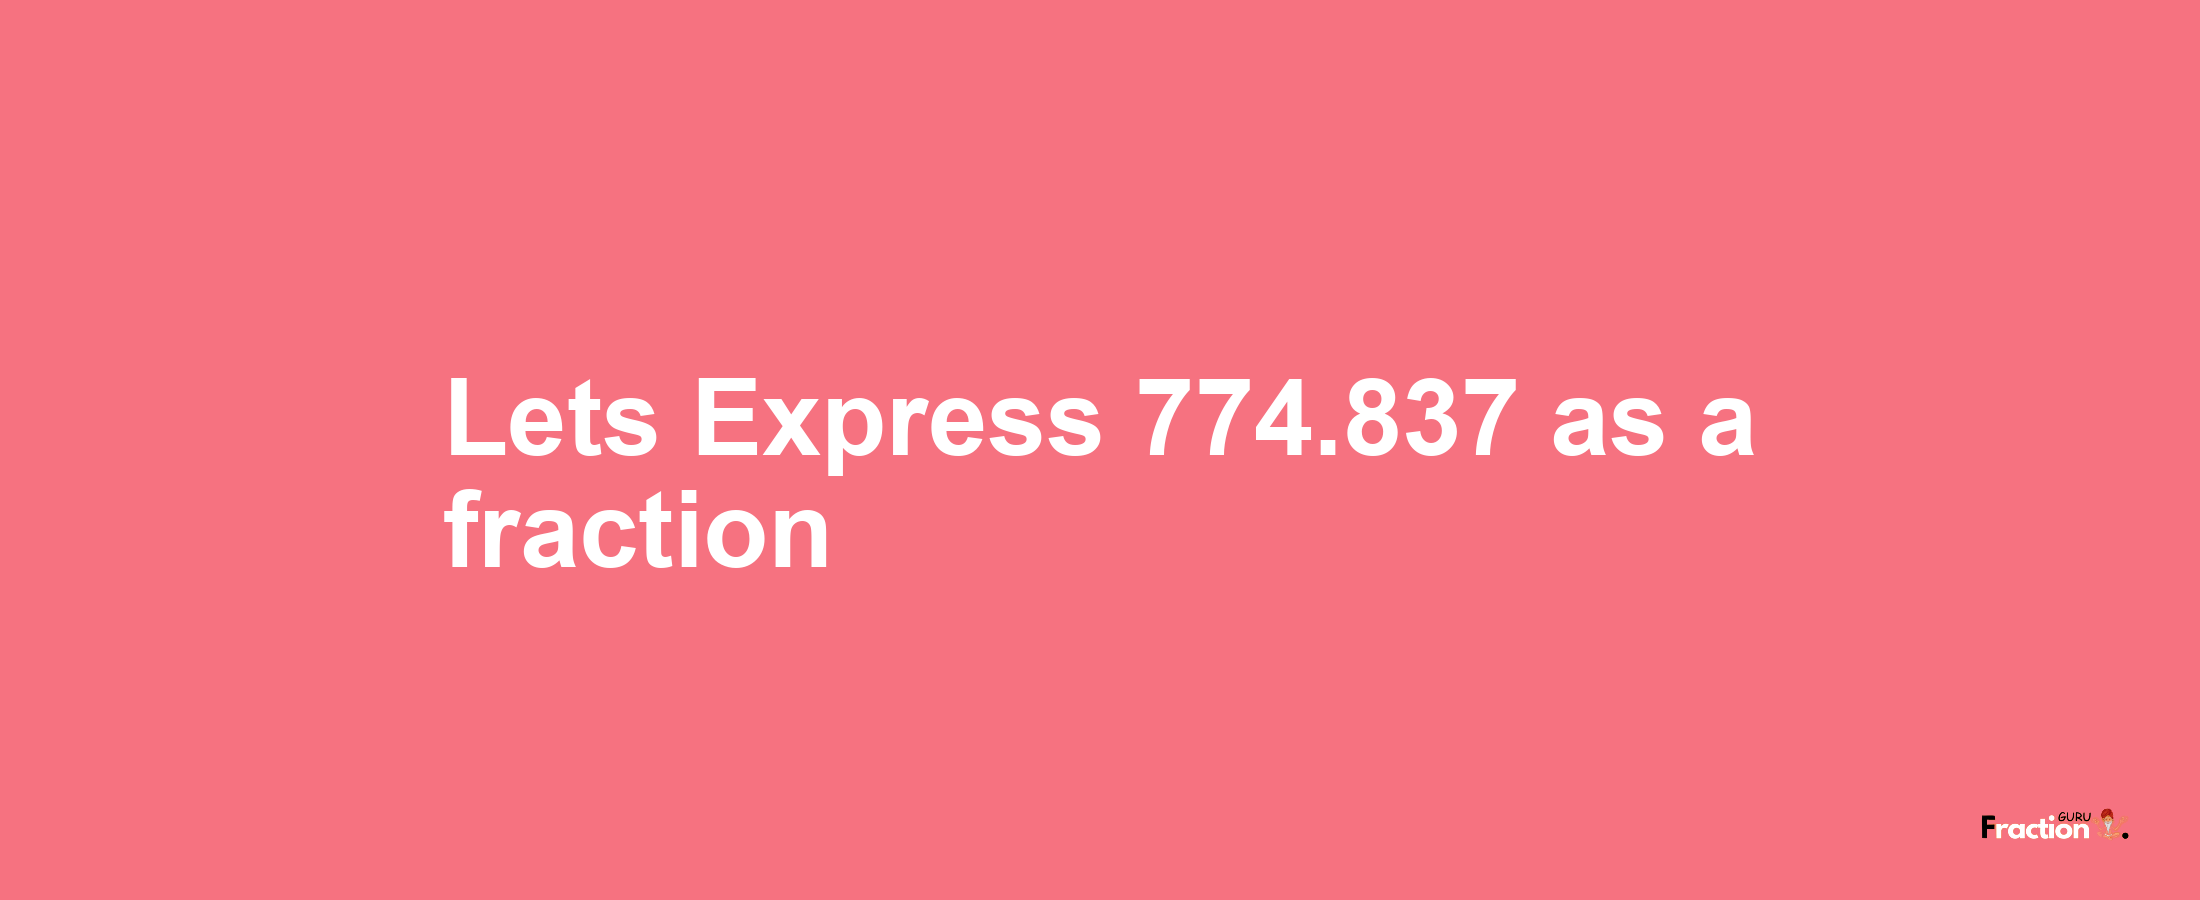 Lets Express 774.837 as afraction